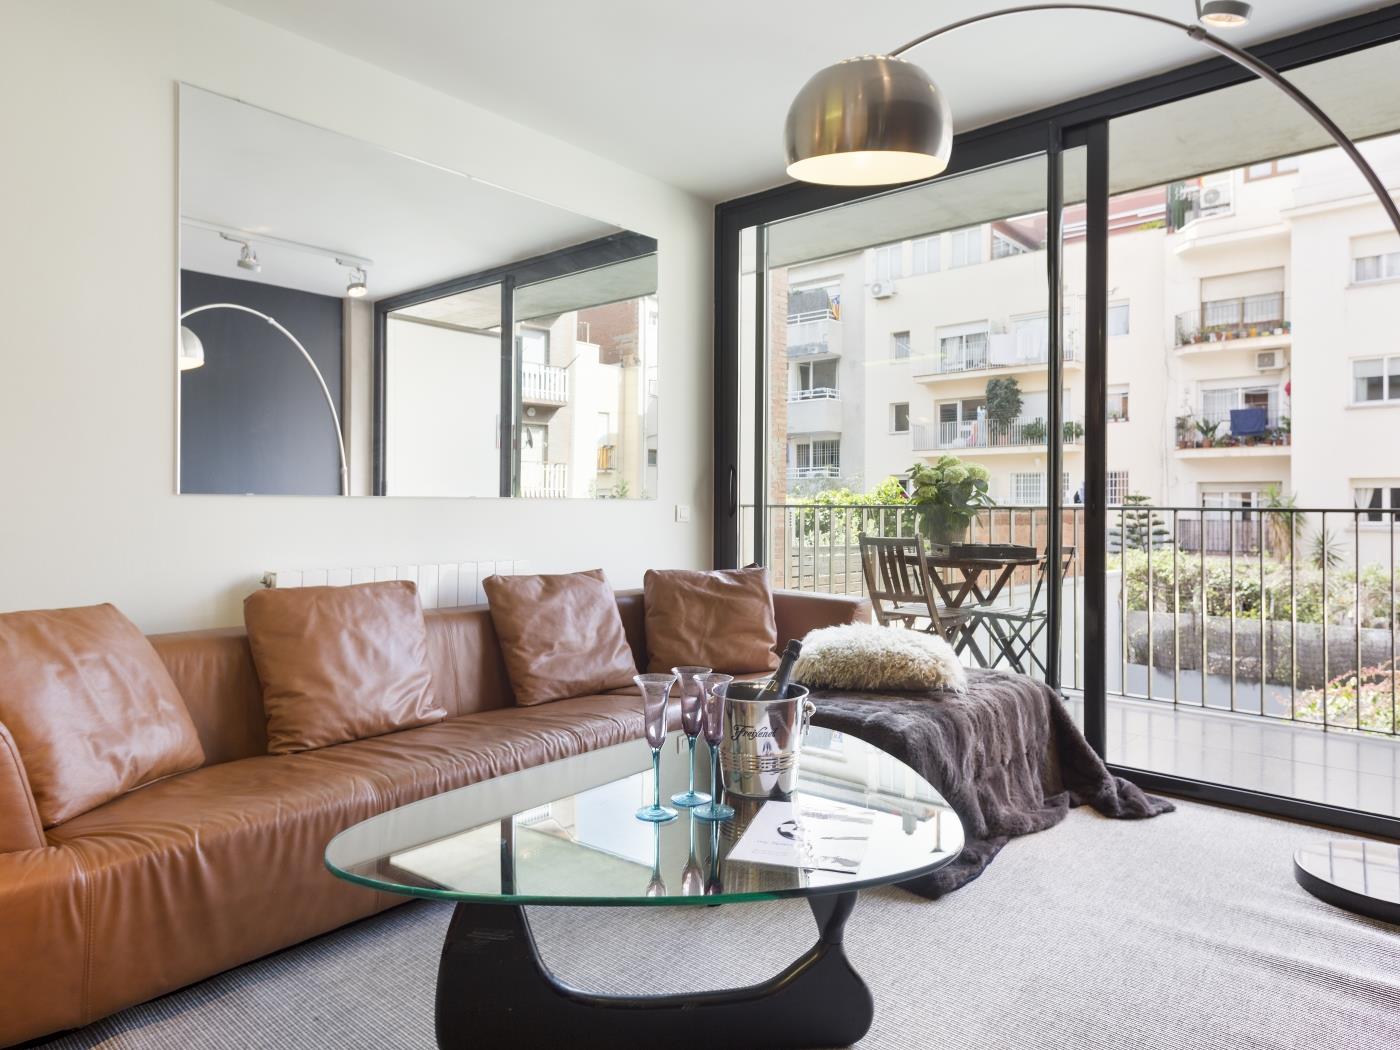 Executive Apartment in Sarrià – Pedralbes - My Space Barcelona Aпартаменты